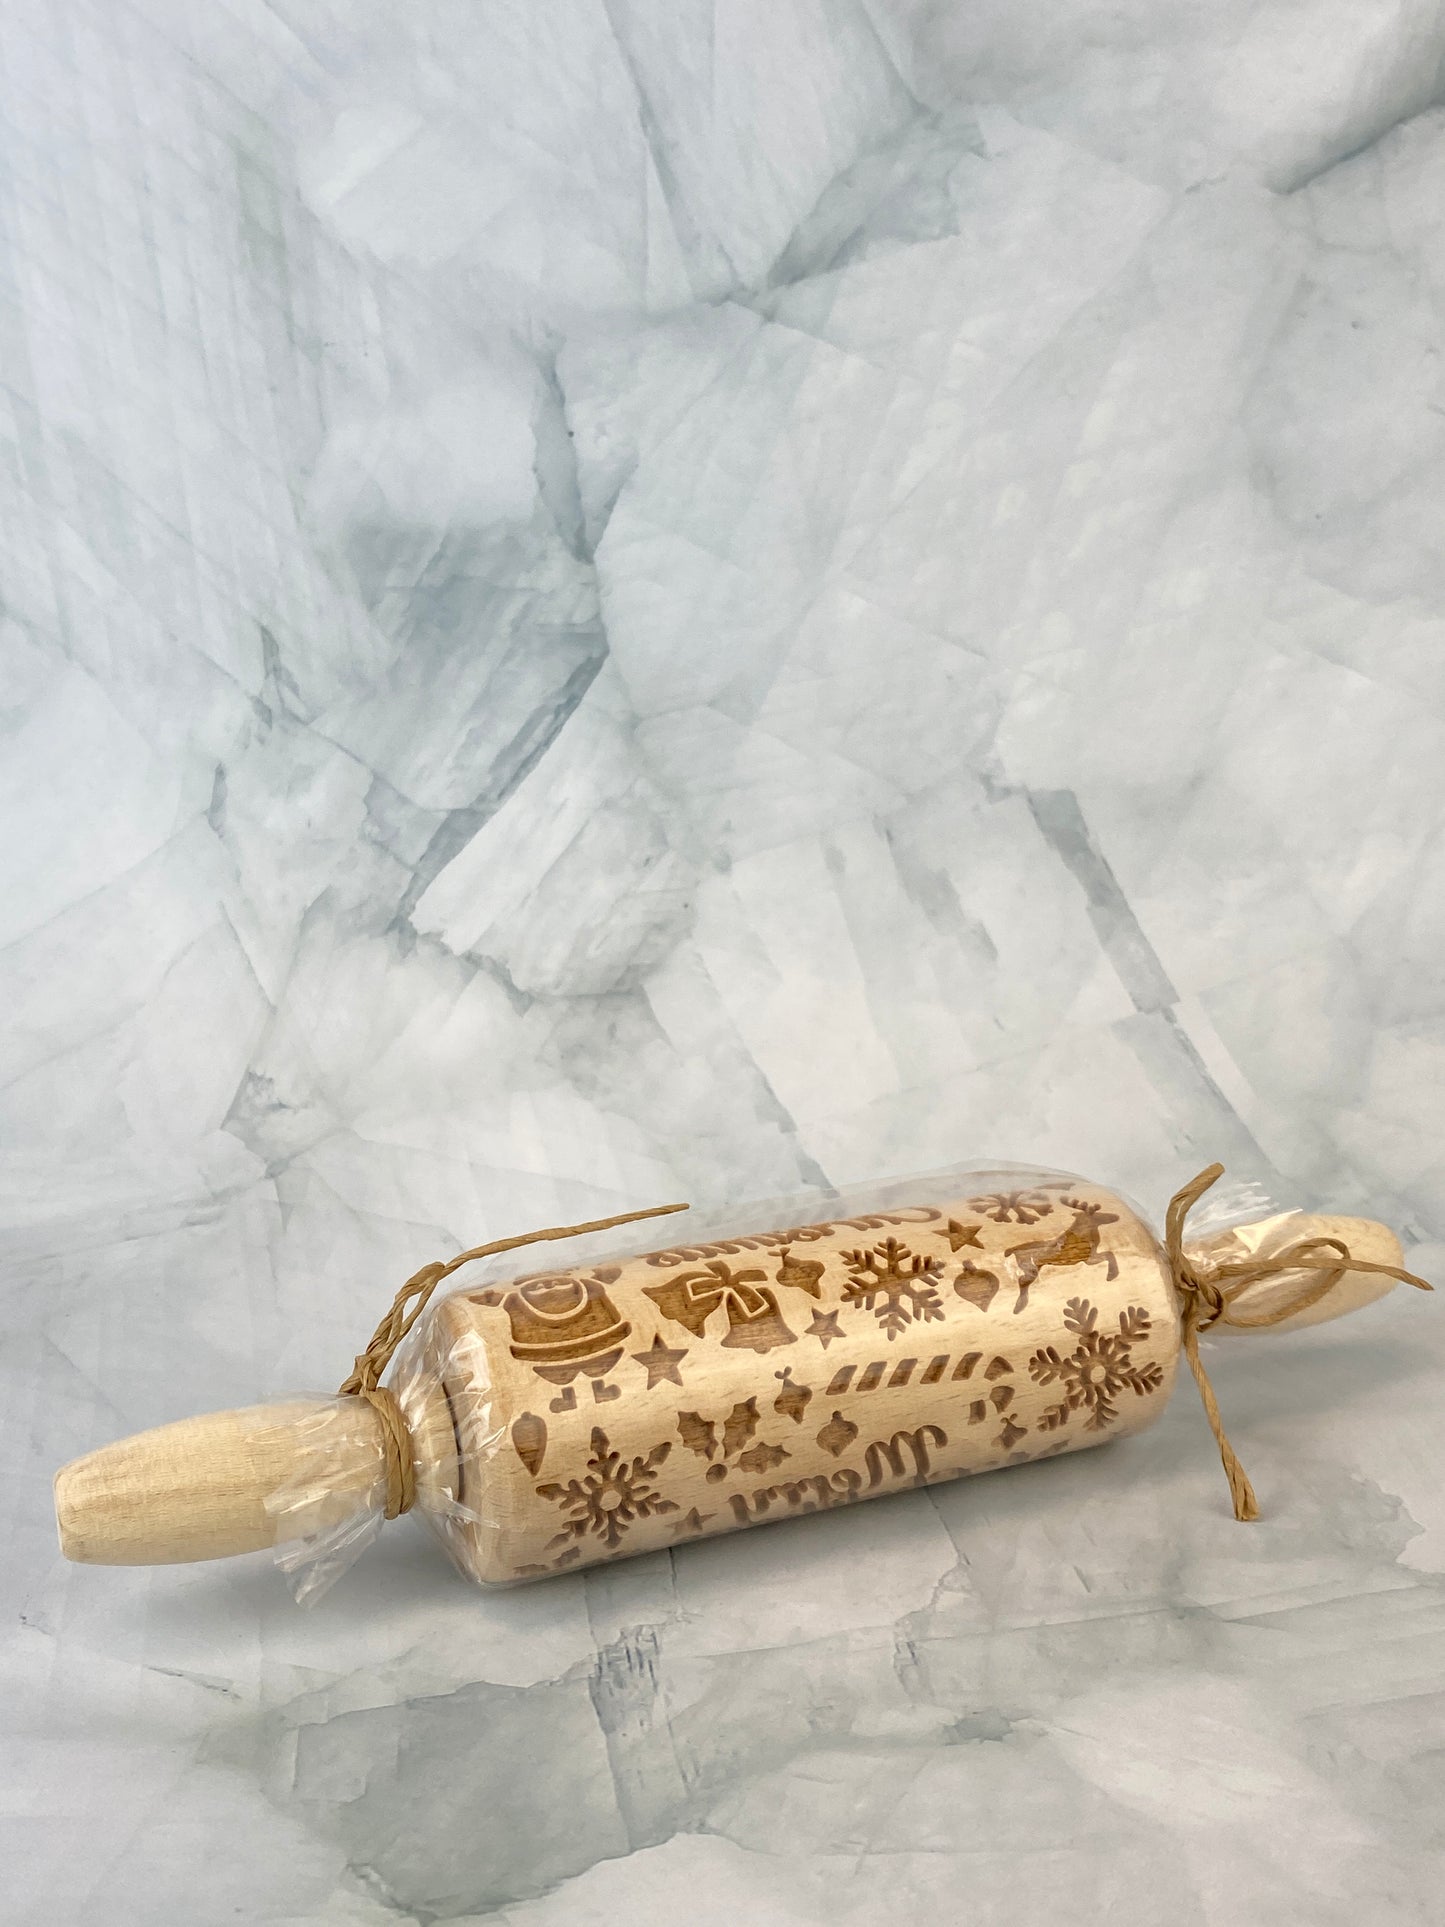 Wooden Holiday Rolling Pin - Merry Christmas!